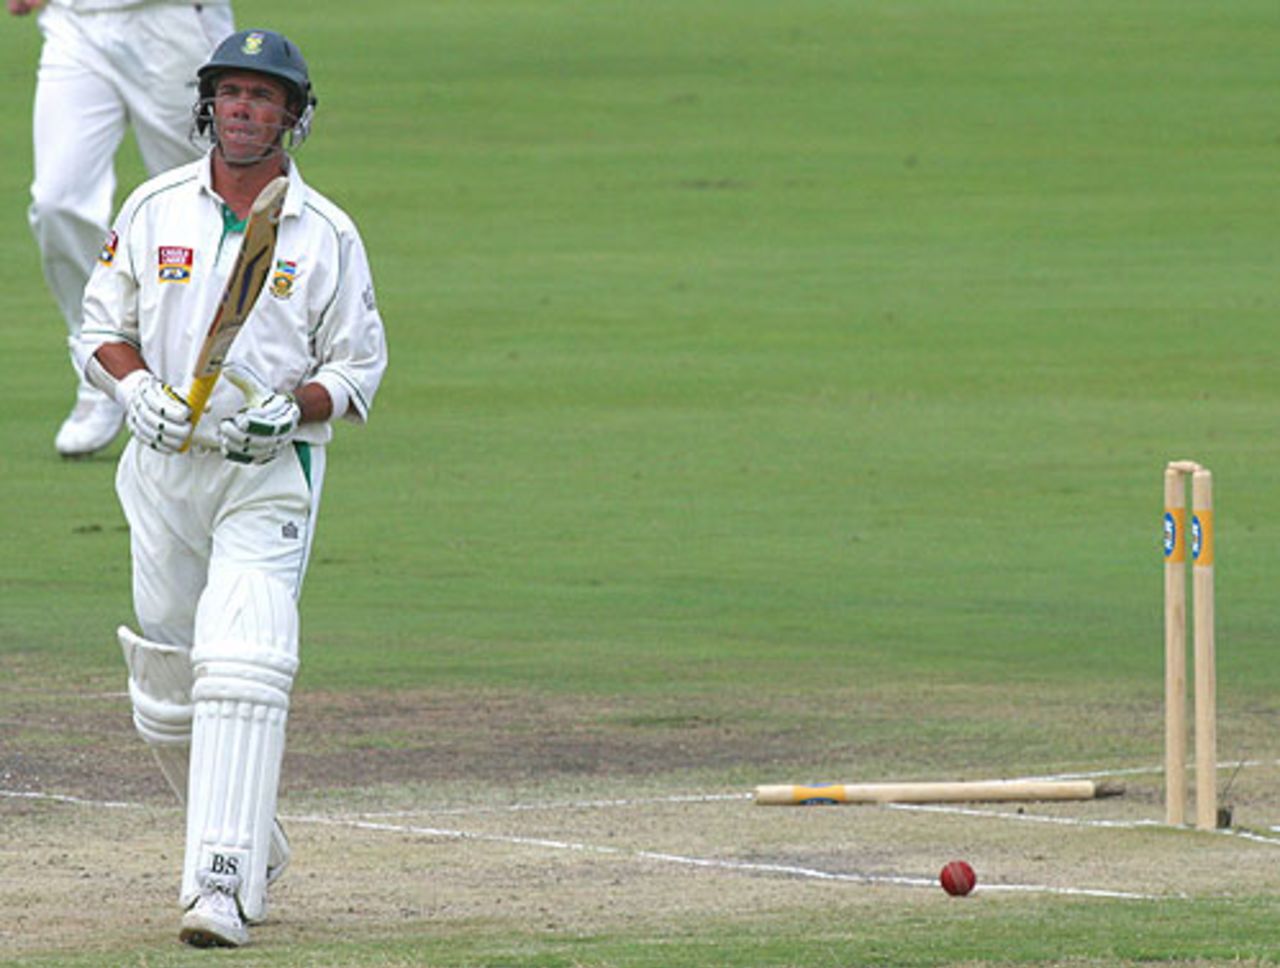 Nicky Boje trudges off, after being bowled by Graeme Cremer for 82, South Africa v Zimbabwe, 2nd Test, Centurion, March 13, 2005